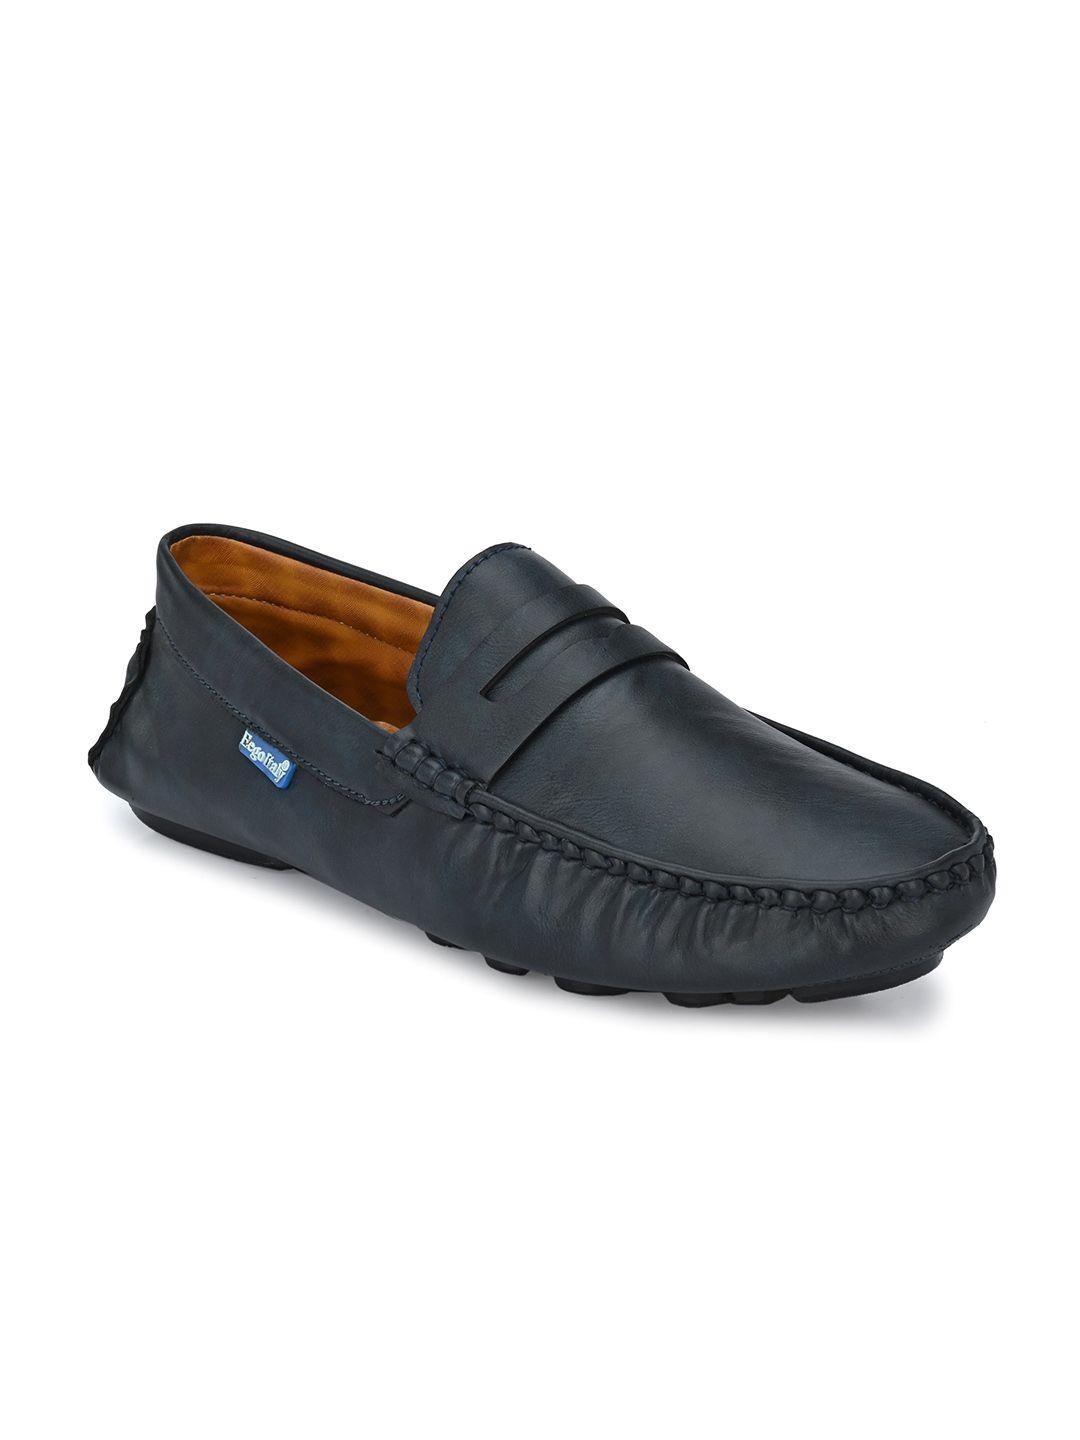 eego italy men slip on perforations loafers